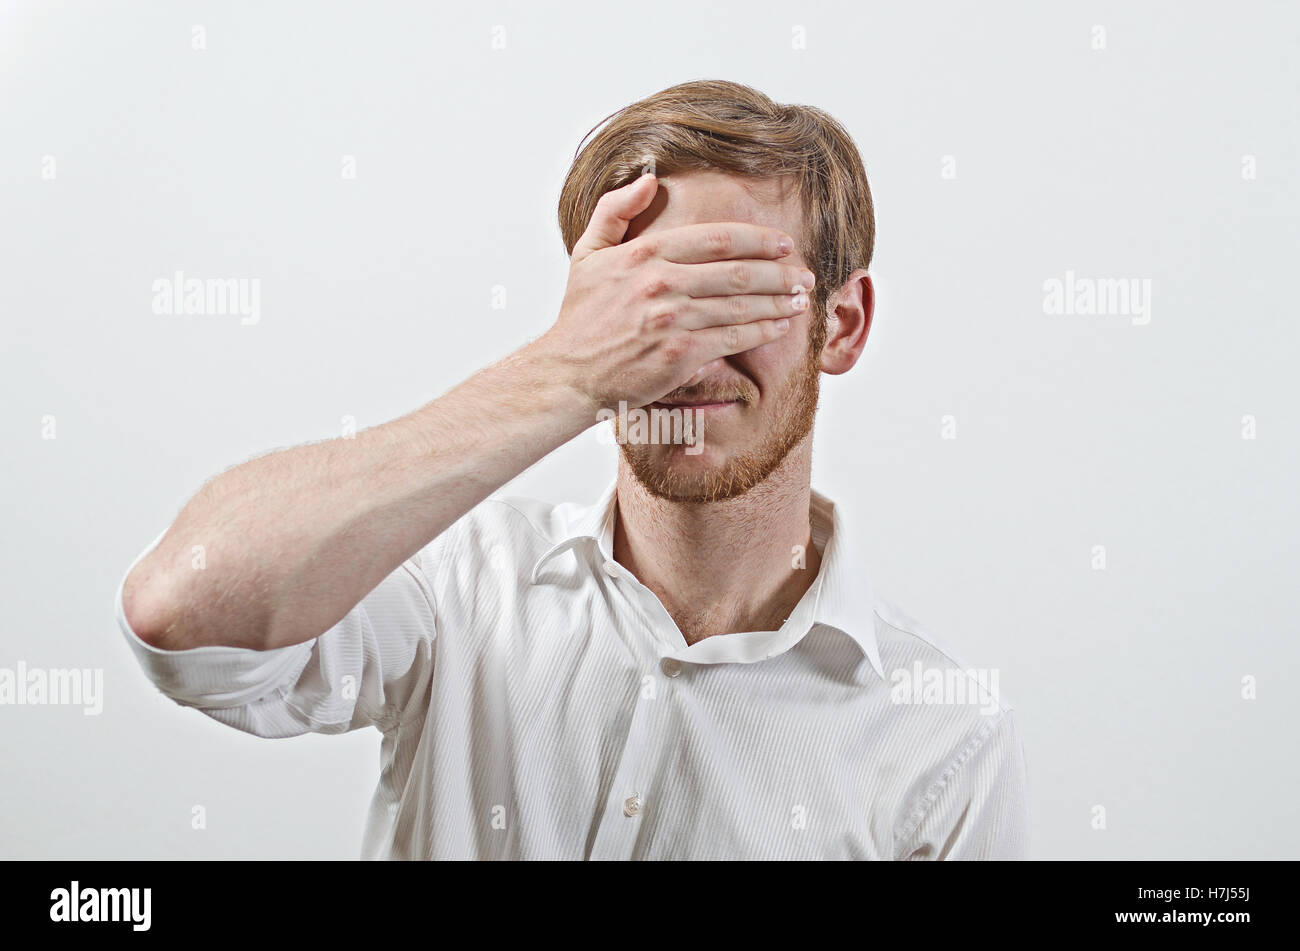 Young Adult Male Wearing White Shirt Covers His Face by Hand, Gesturing He Has Made a Big Mistake Stock Photo